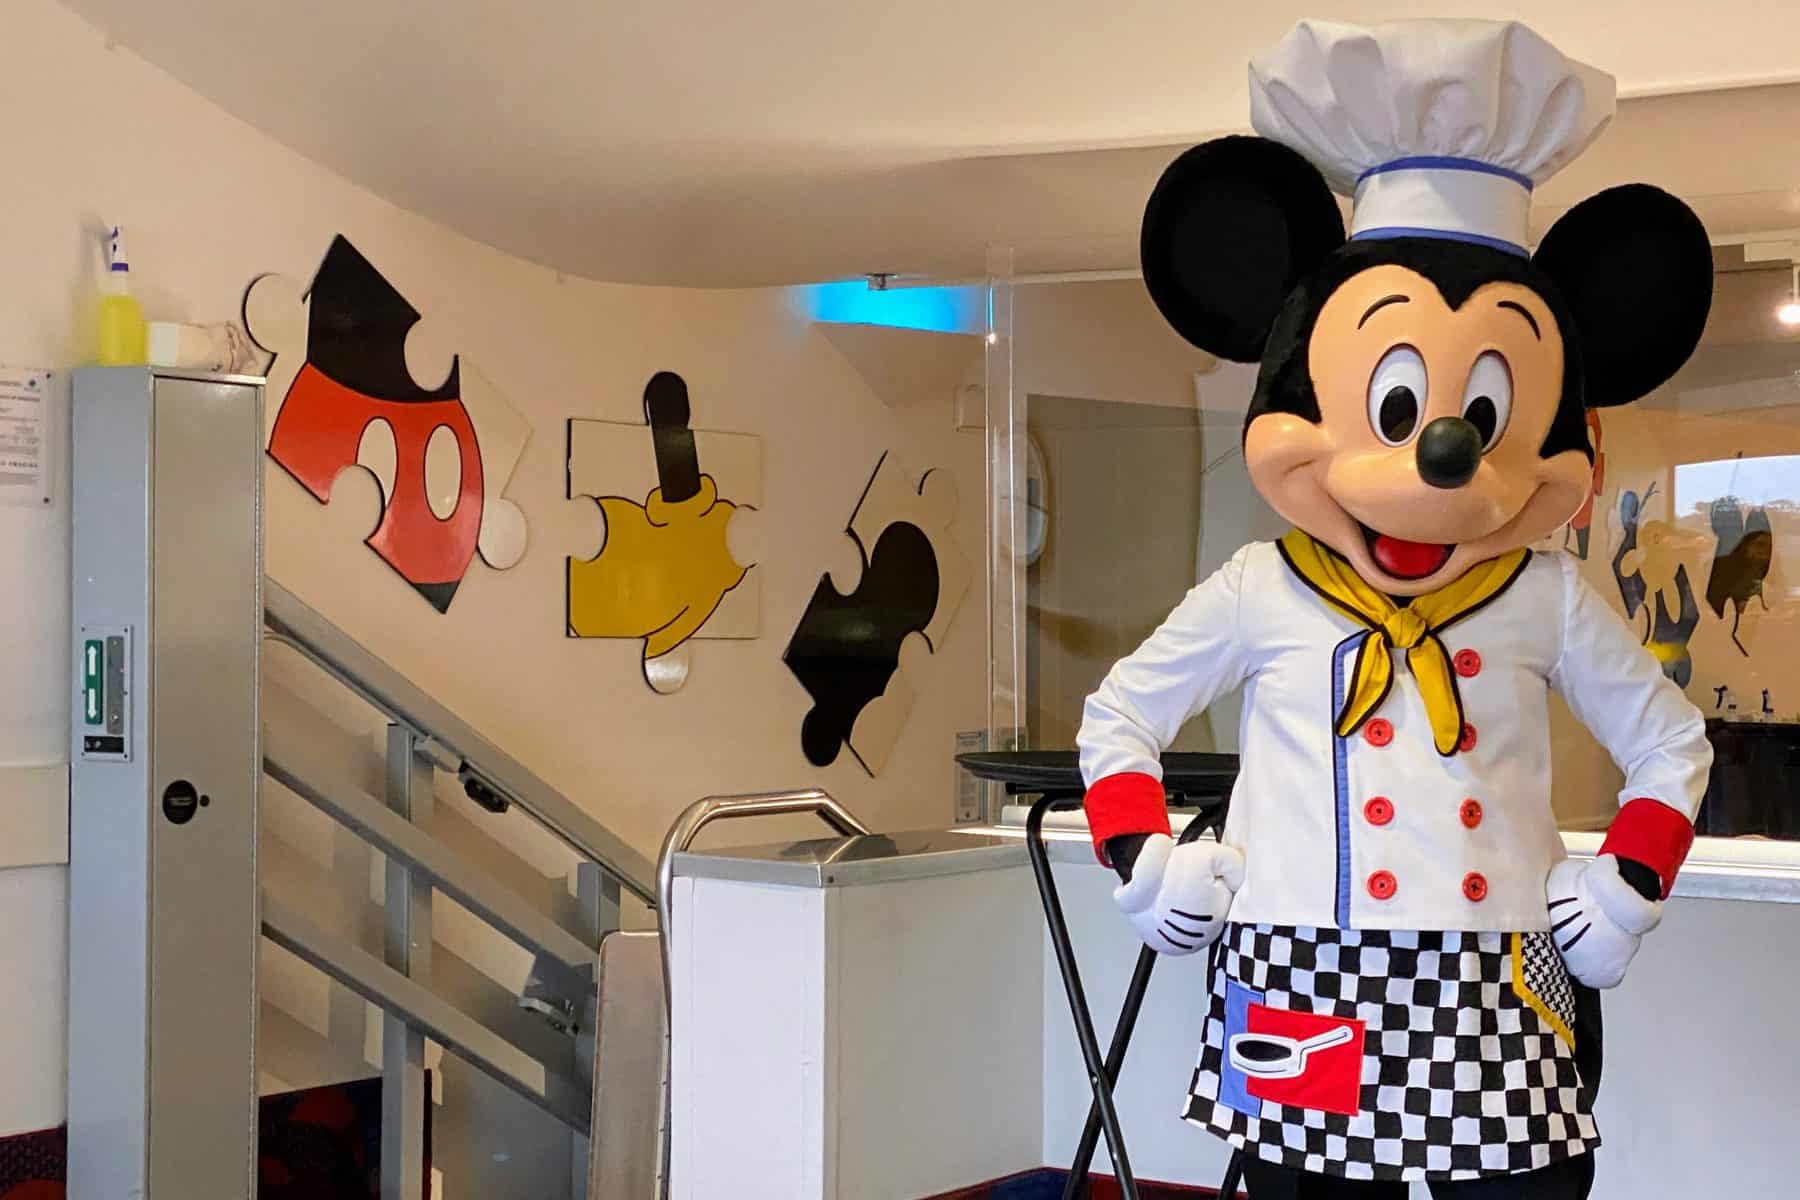 Our review of Chef Mickey’s (now with characters!)